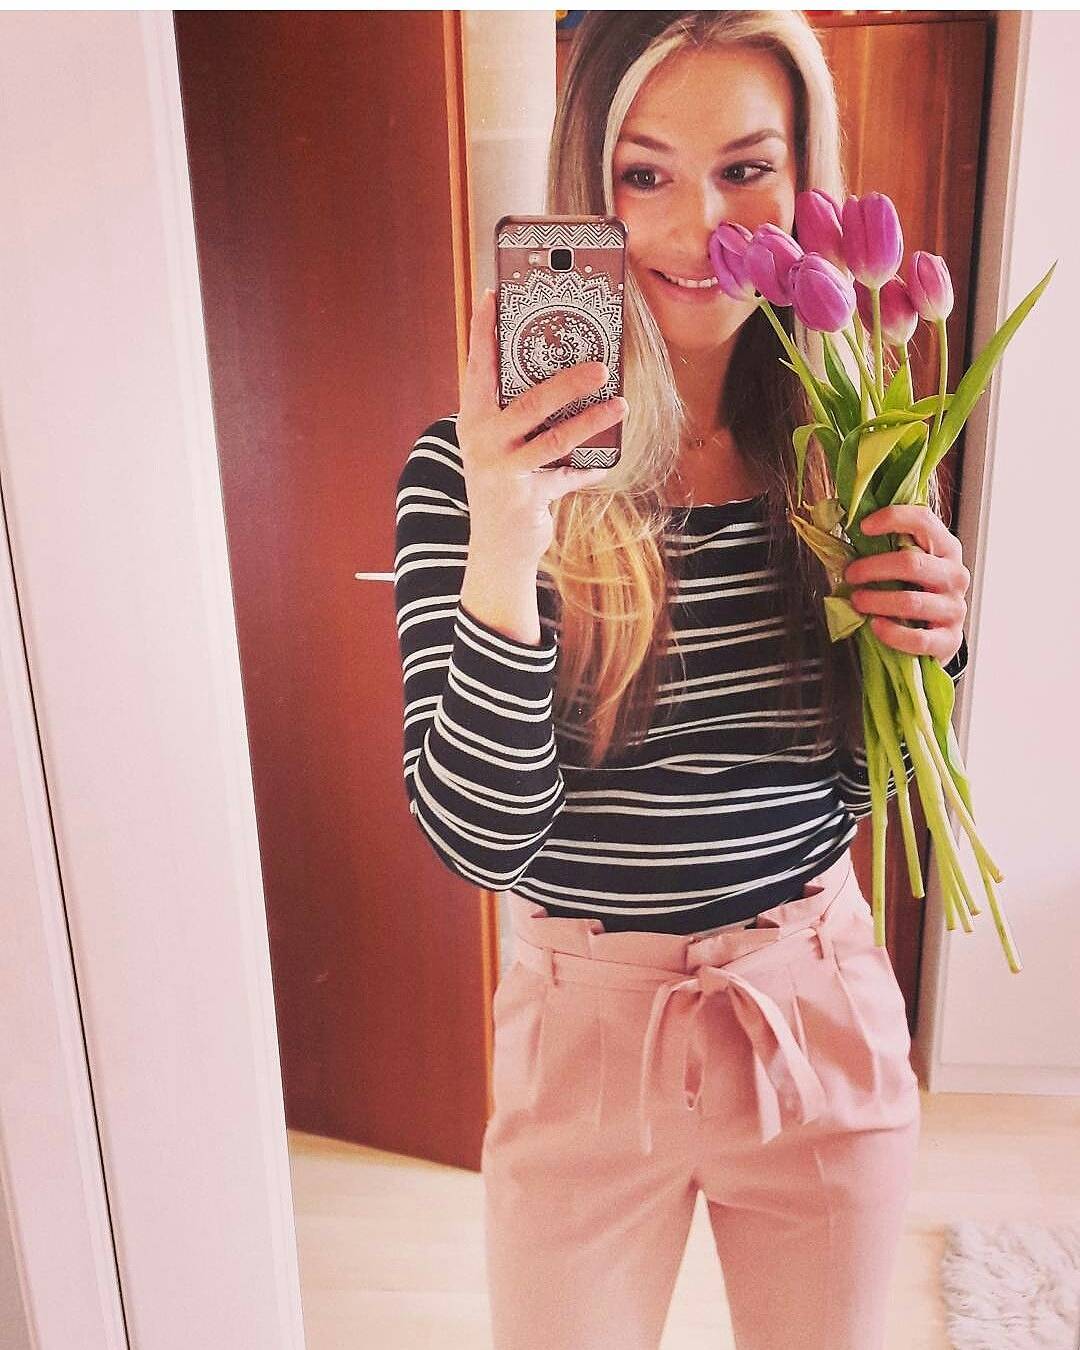 #outfit #look #springoutfit # frühlingsvibes #instadaily #mood #amazing #cute #instamama #lifestyle